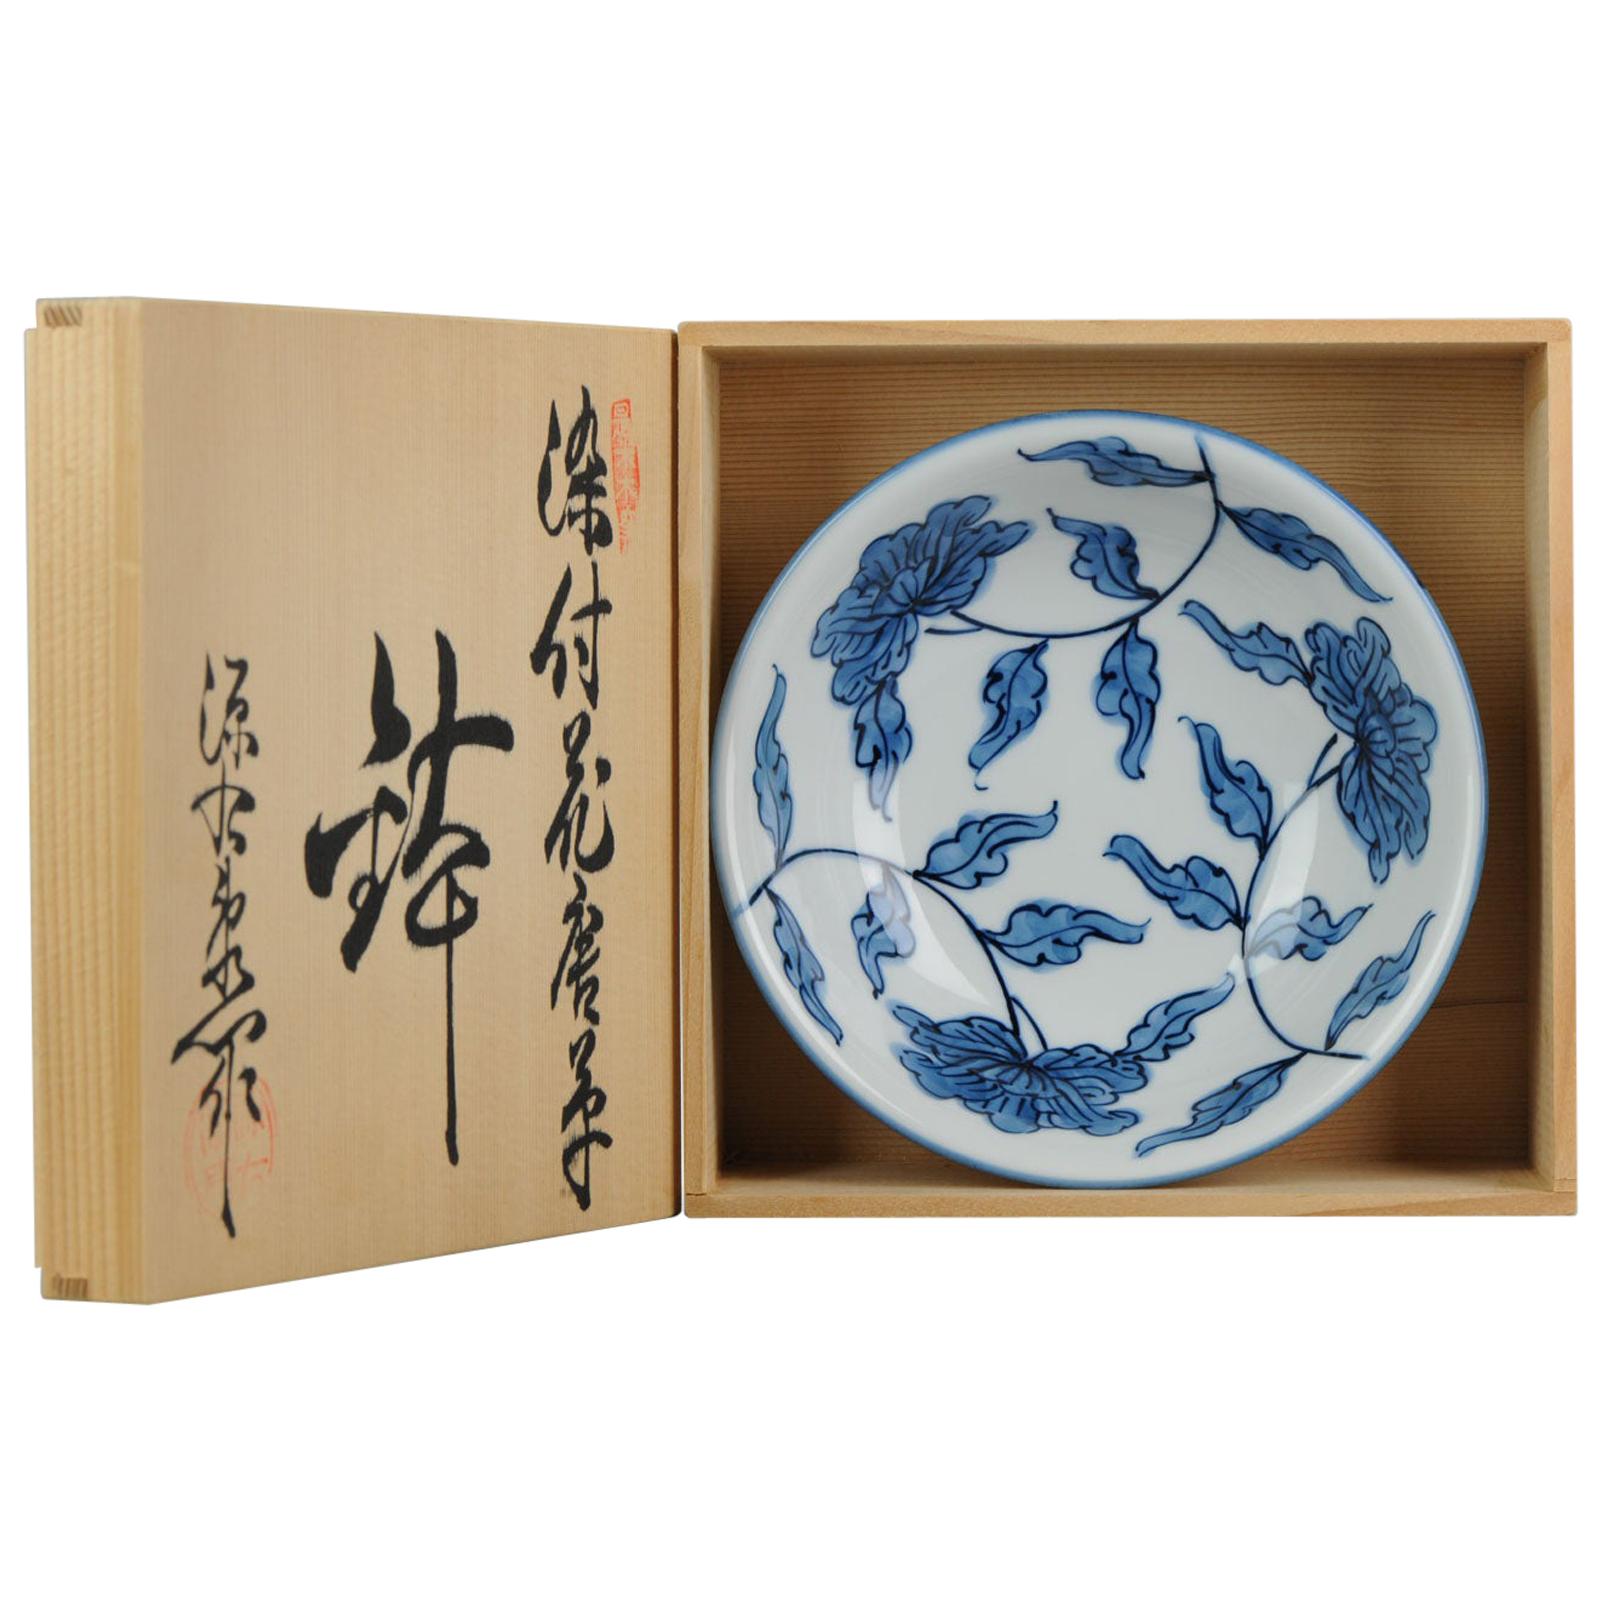 Great 20th Century Japanese Raw Fish Bowls Blue and White Hand Painted Artist